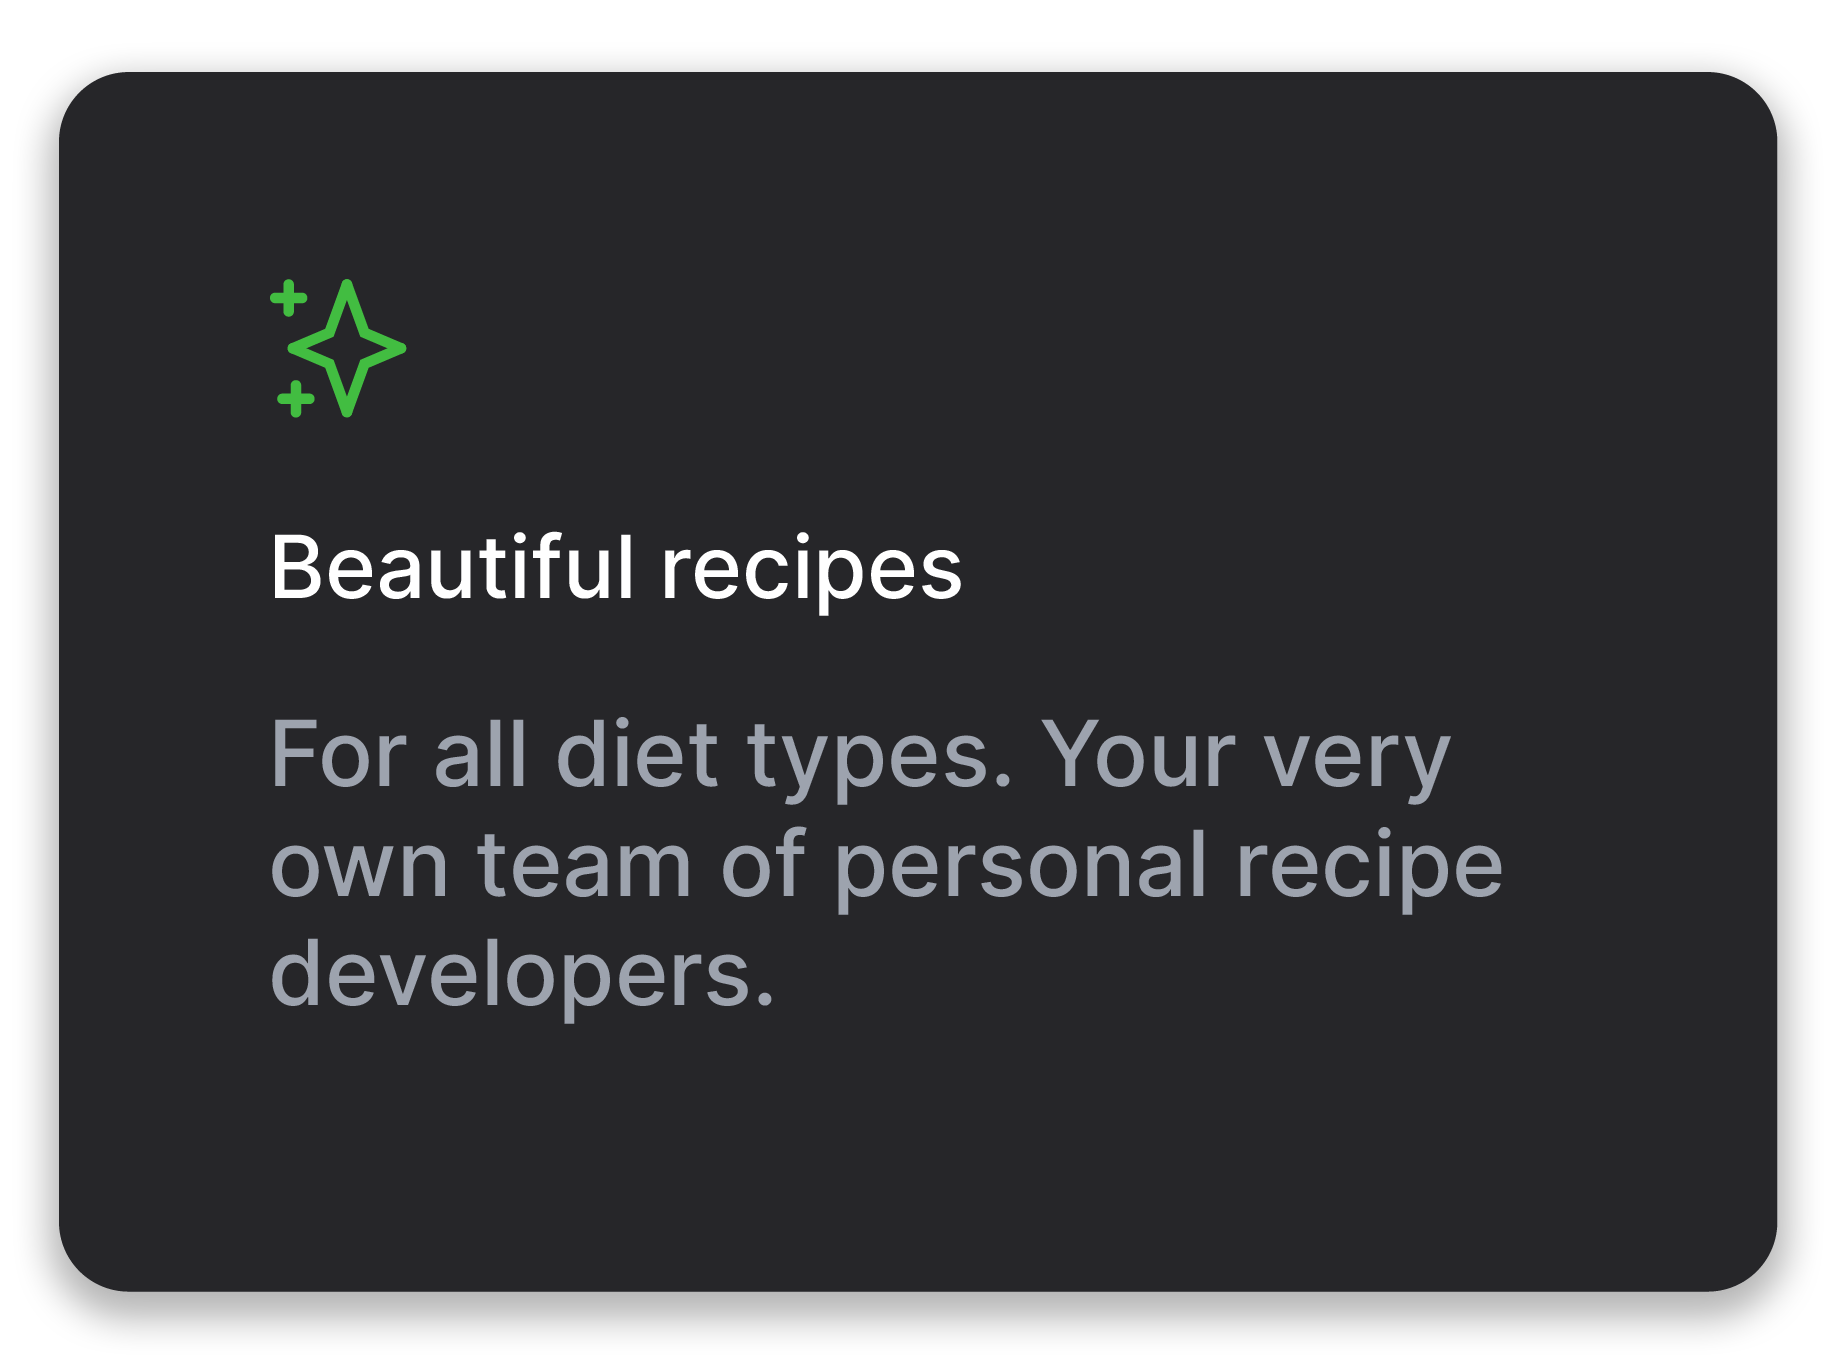 Beautiful recipes - For all diet types. Your very own team of personal recipe developers.